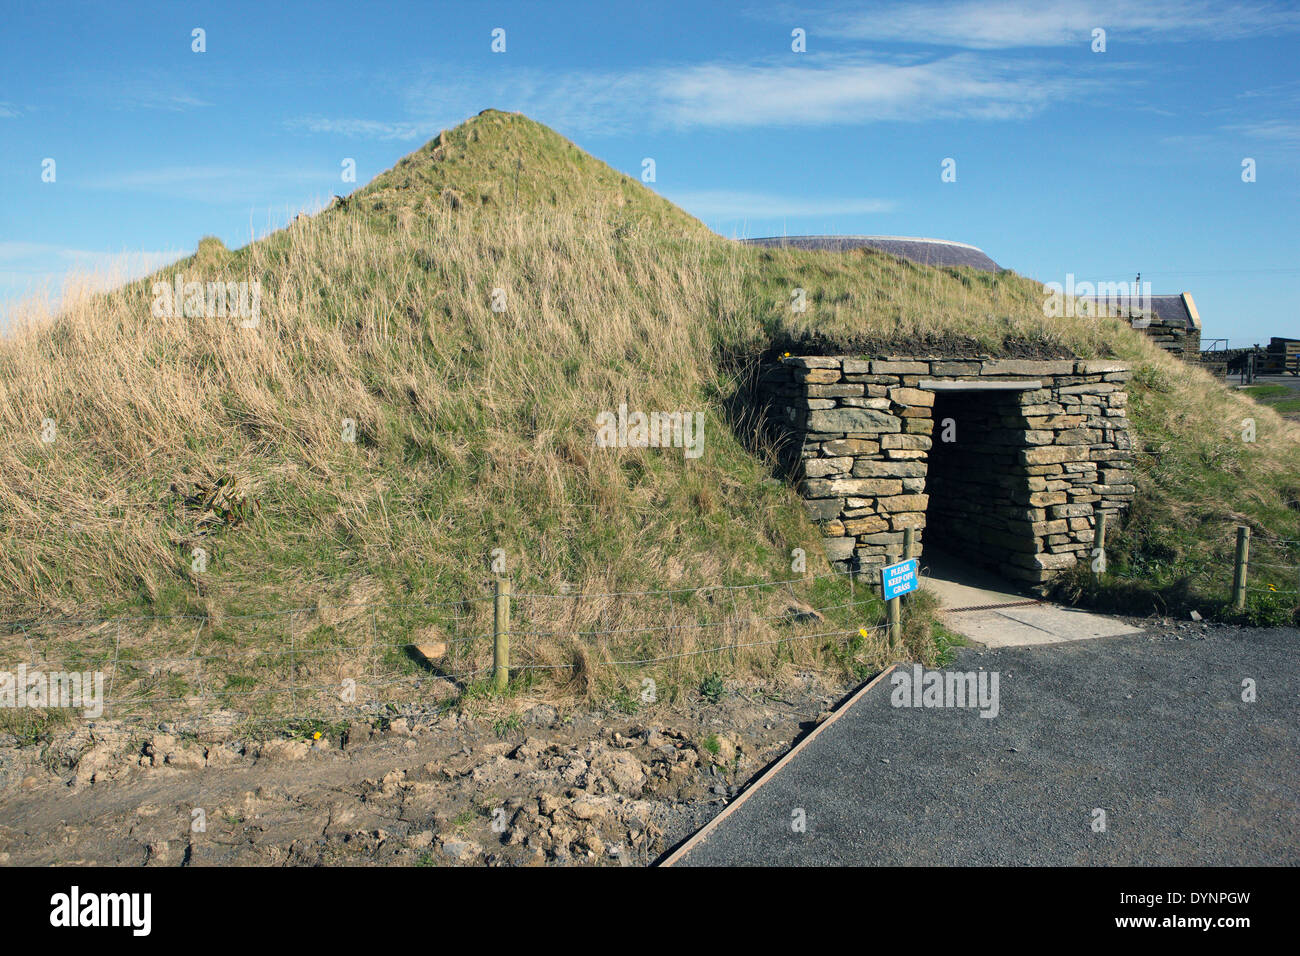 Entrance to a replica construction of a prehistoric house at Skara Brae in Orkney. This allows Stock Photo